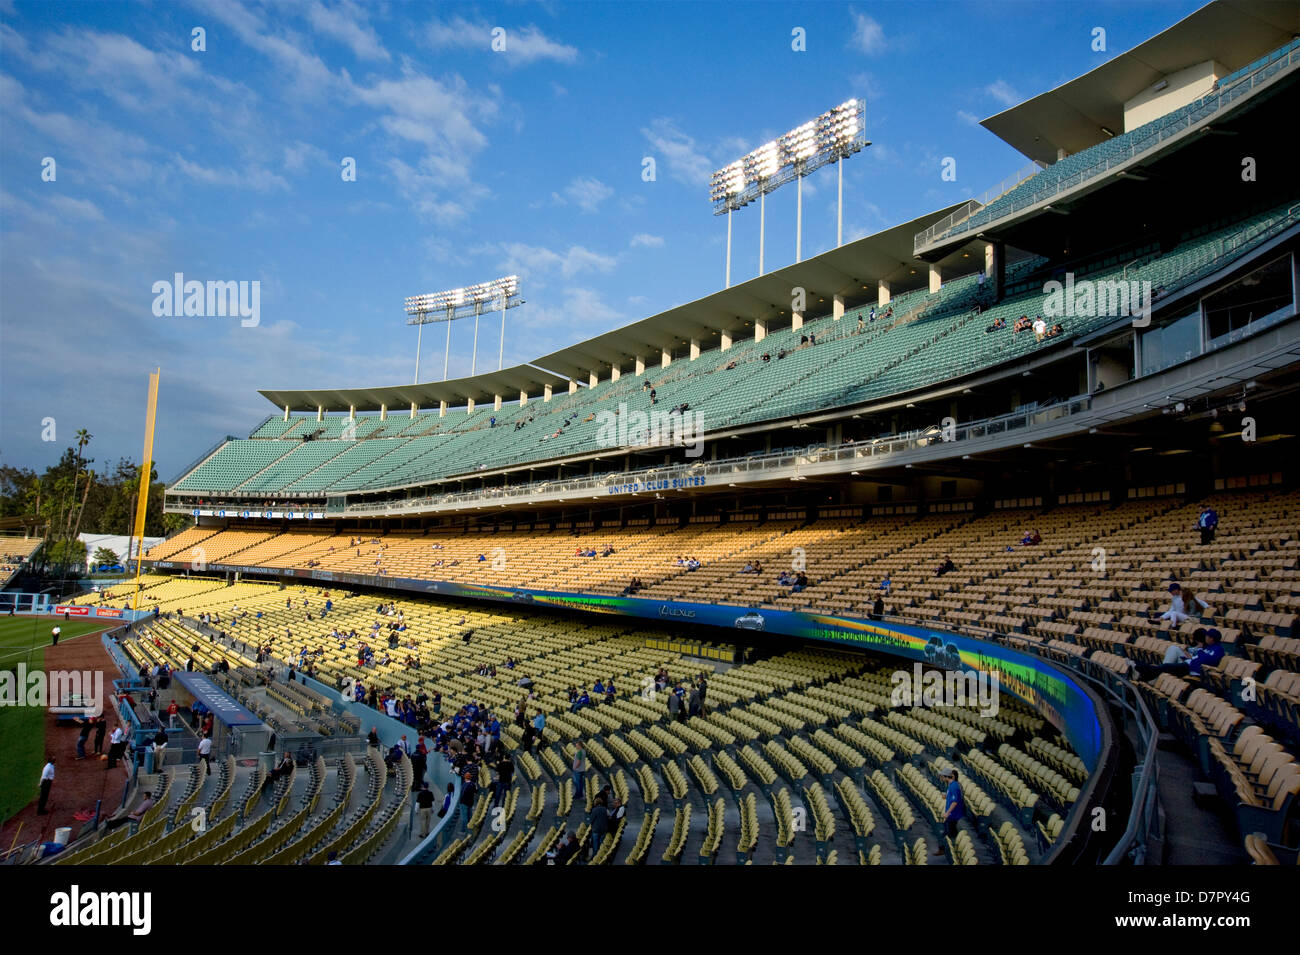 Fans arriving at Dodger Stadium in Los Angeles fin the late afternoon for a night game Stock Photo